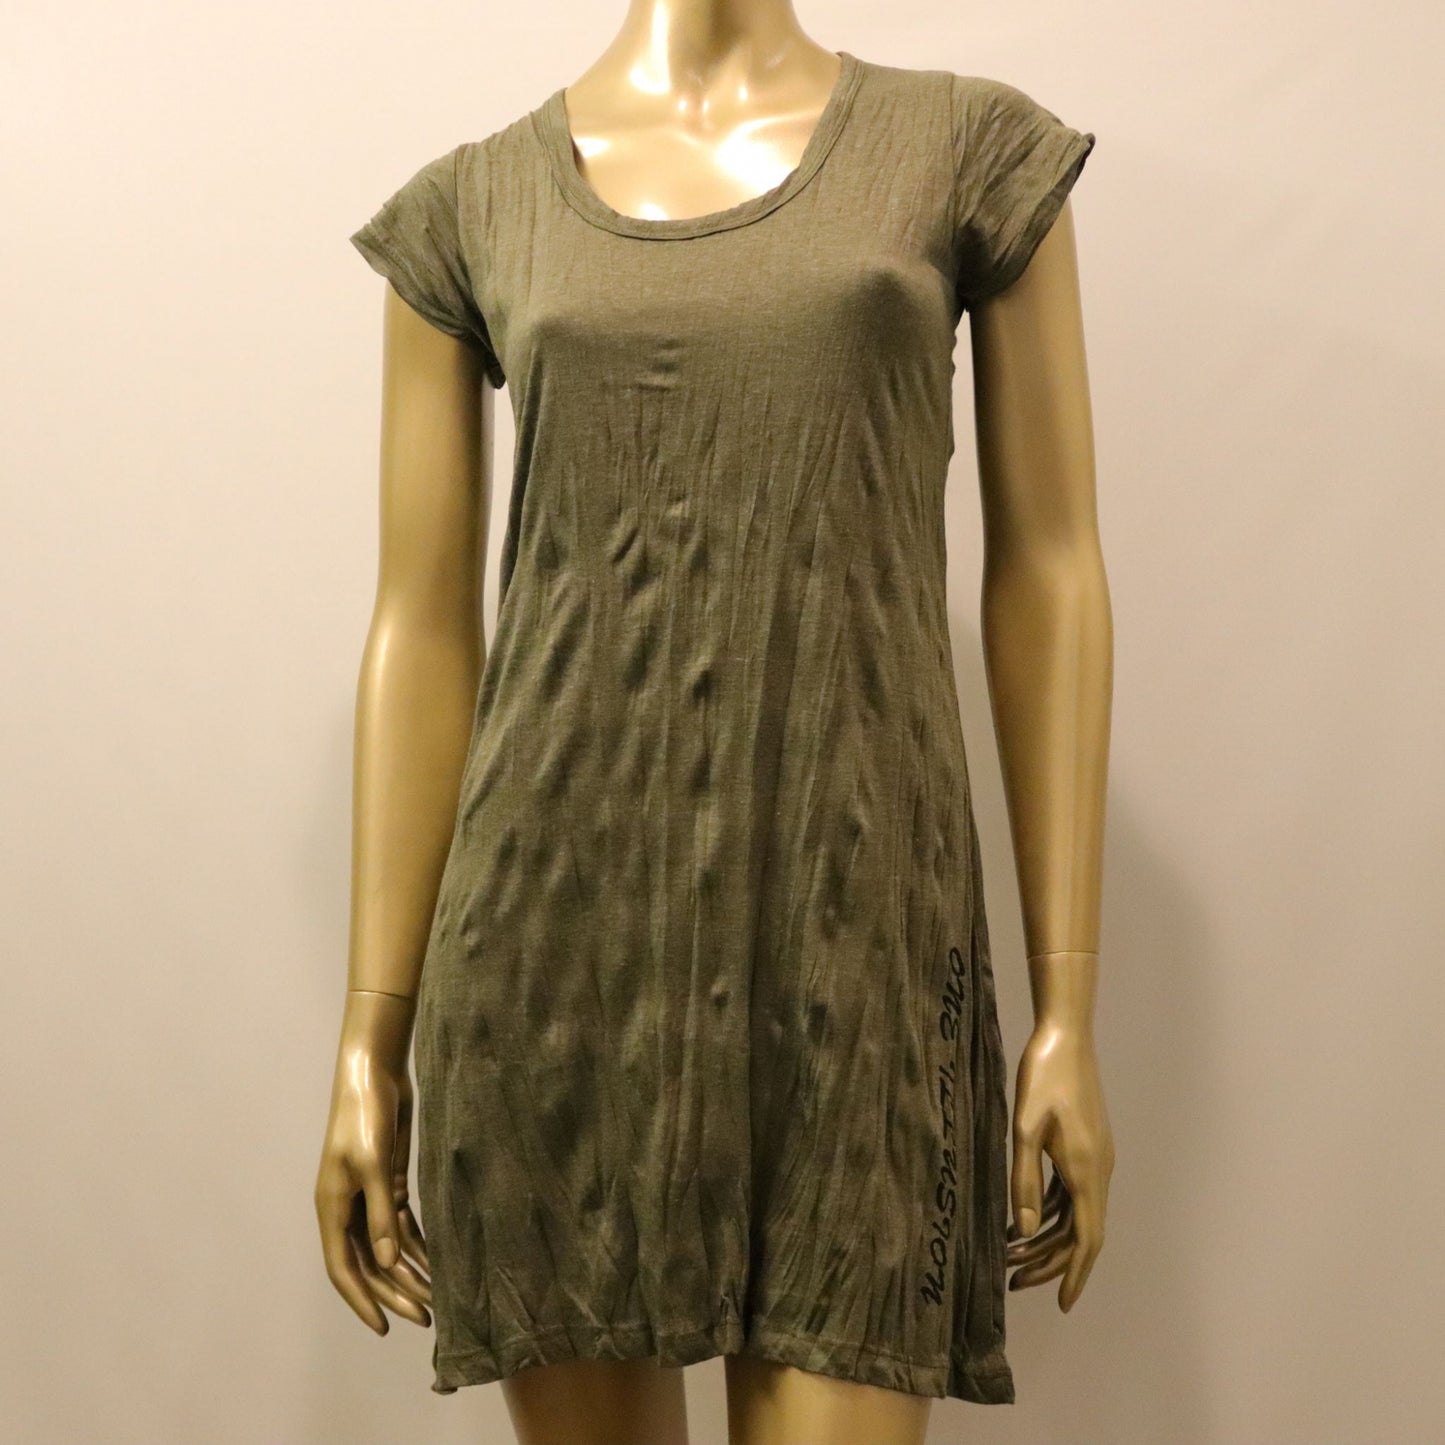 Traveler's T-shirt Dress by One Illusion